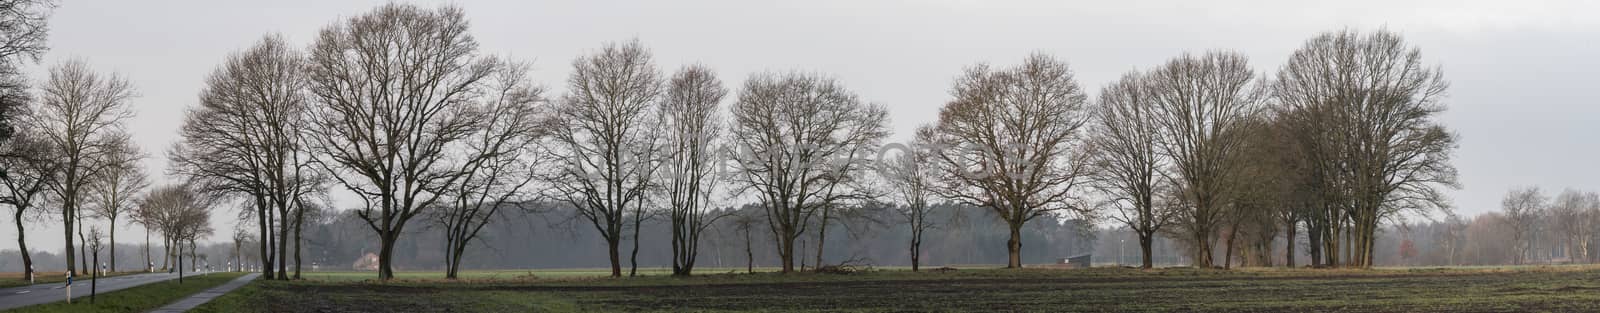 row of bare trees at the edge of a large arable land, panorama with large open space as a header for a website by geogif